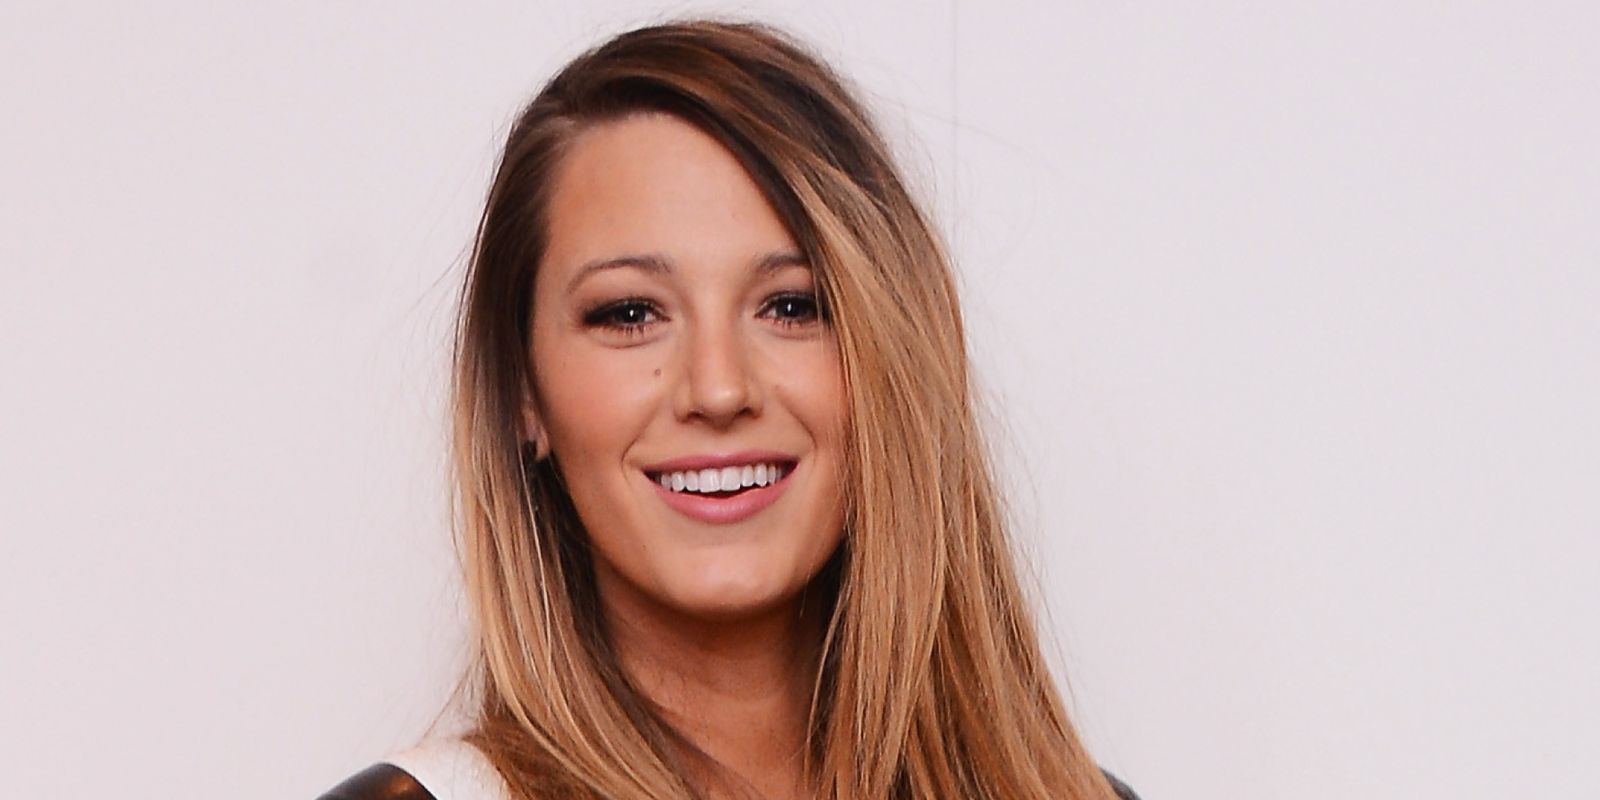 Blake Lively To Play A MMA Fighter In 'Bruised'